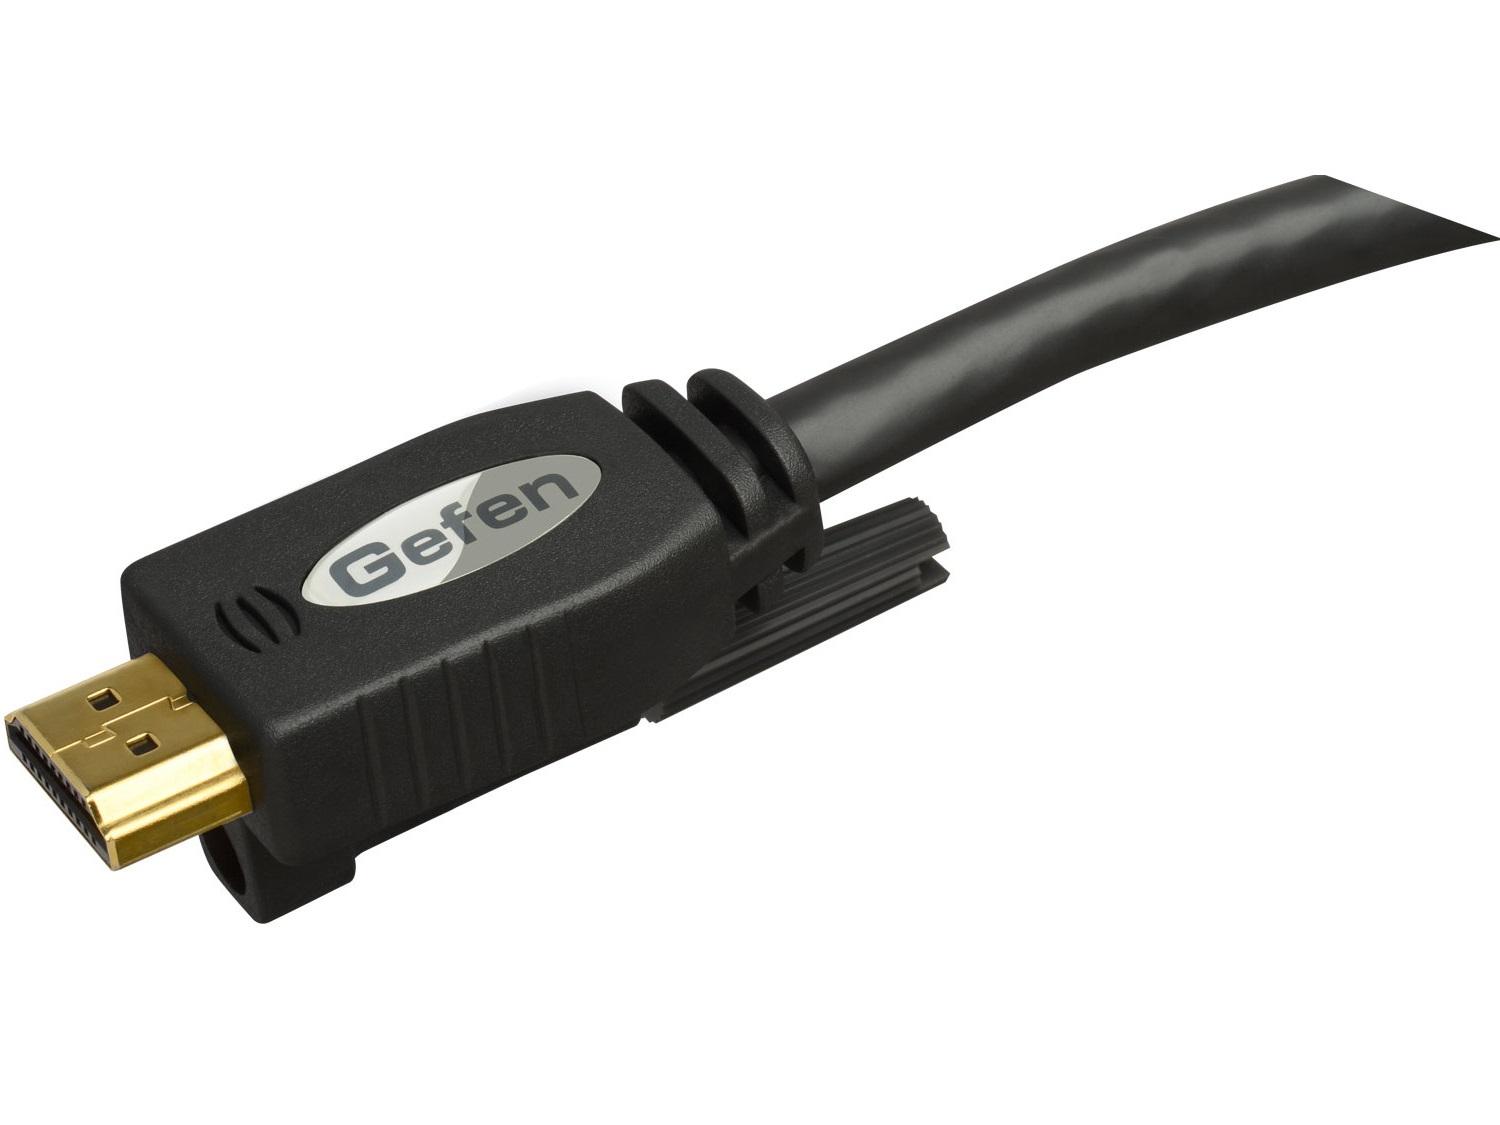 CAB-HD-LCK-06MM High Speed HDMI Cable w Ethernet and Mono-LOK (M-M) - 6 ft by Gefen